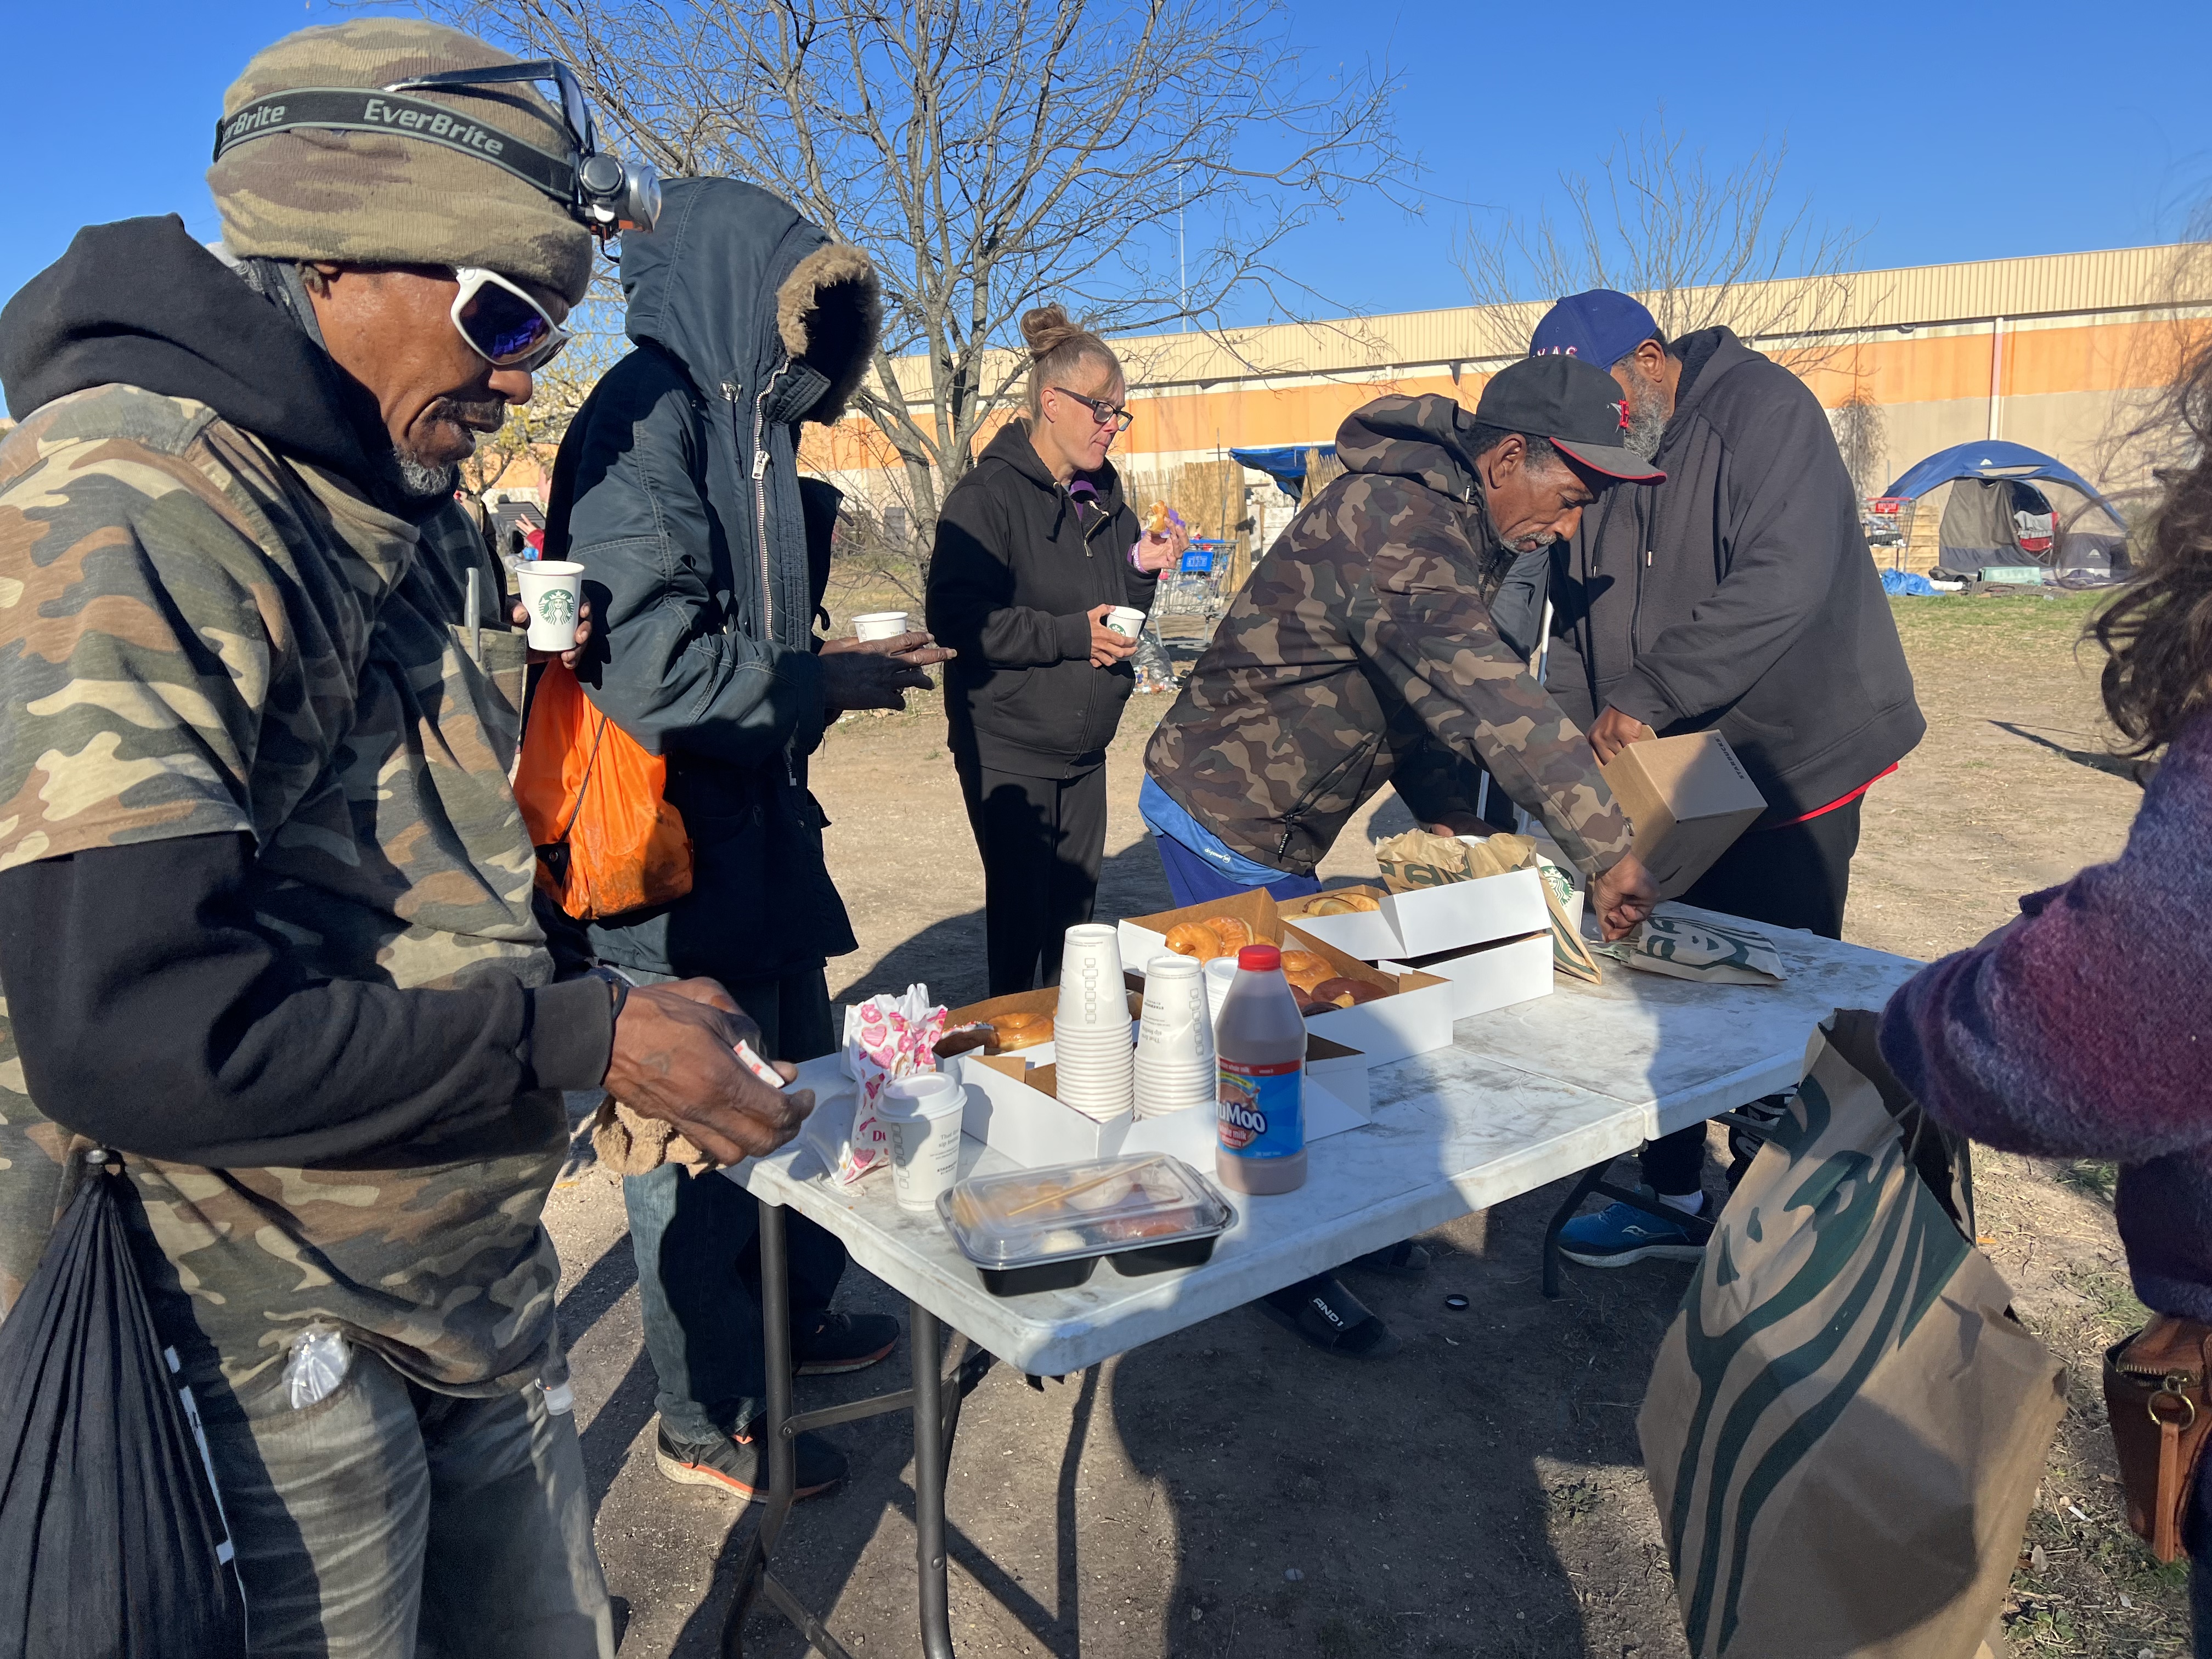 Encampment residents were provided breakfast and hot coffee